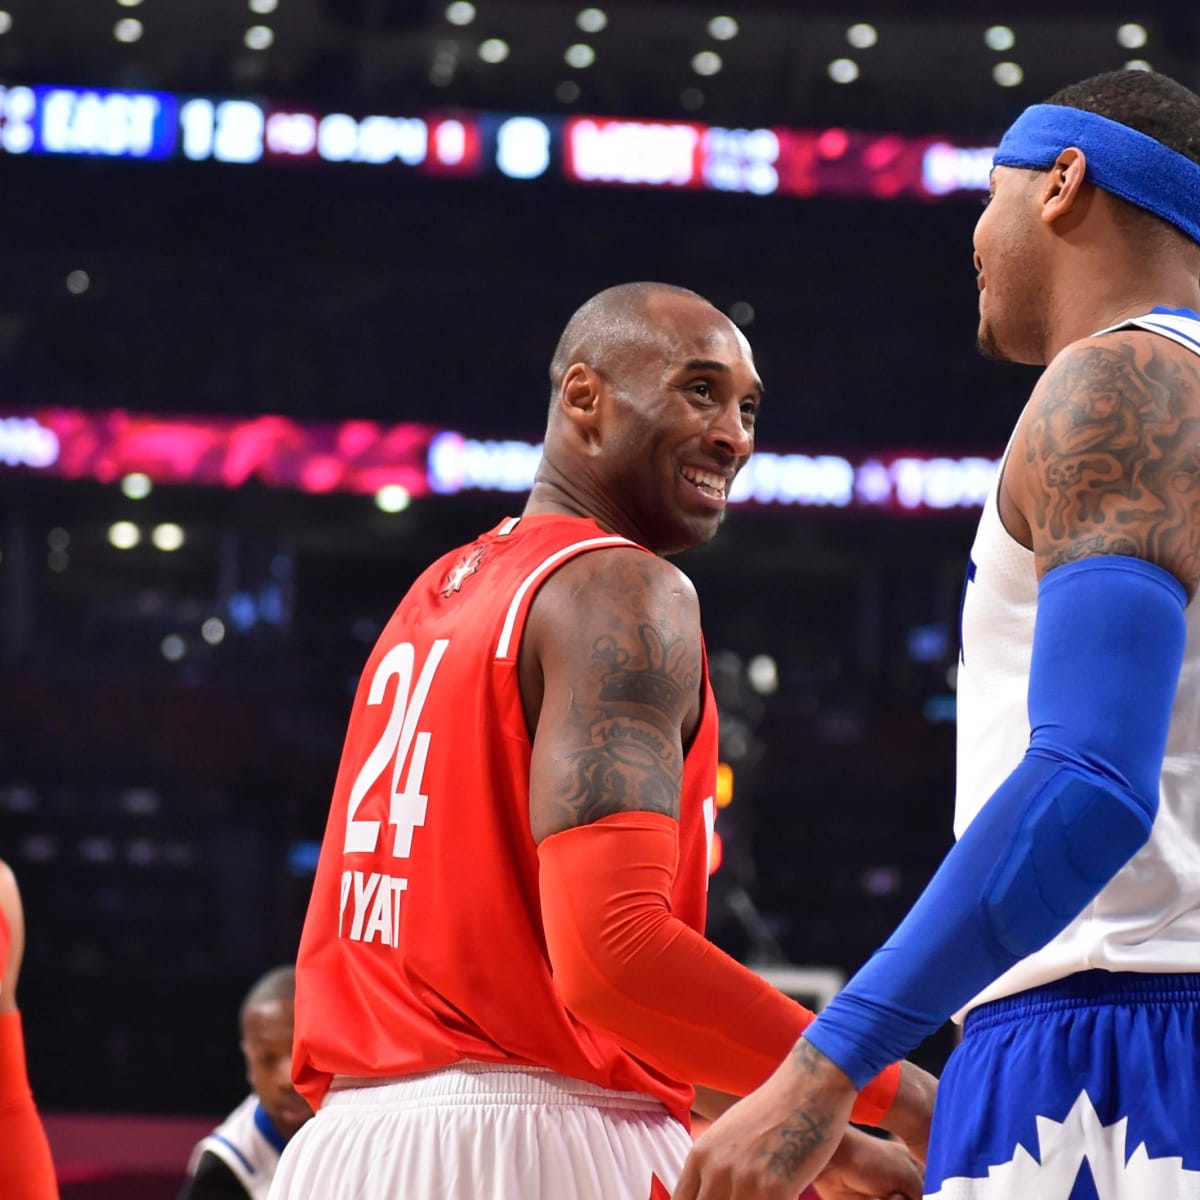 Carmelo Anthony talks about playing against Kobe Bryant